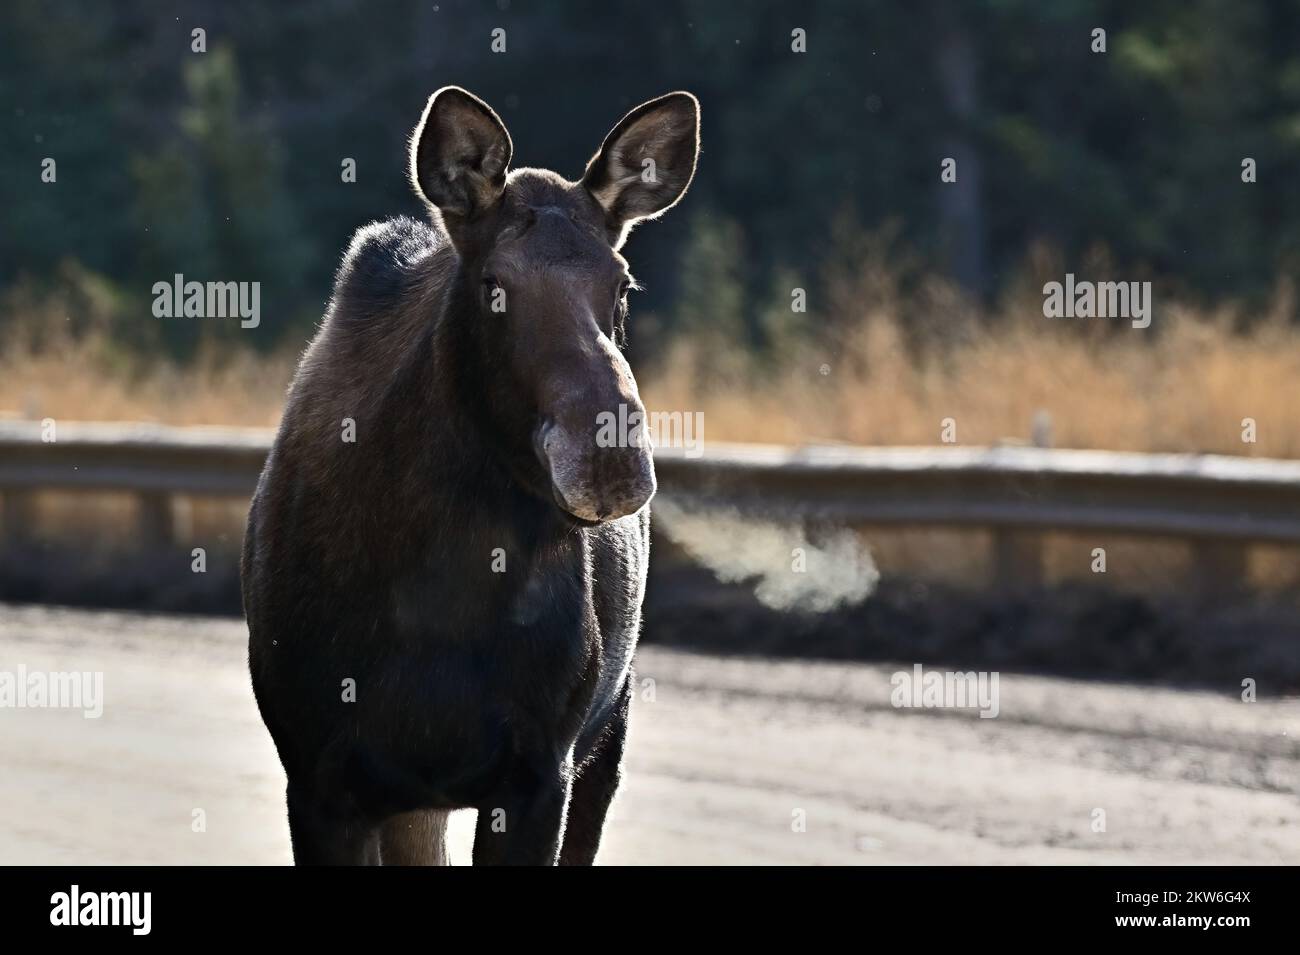 A portrait image of a wild female moose 'Alces alces', walking on a gravel road in rural Alberta Canada Stock Photo